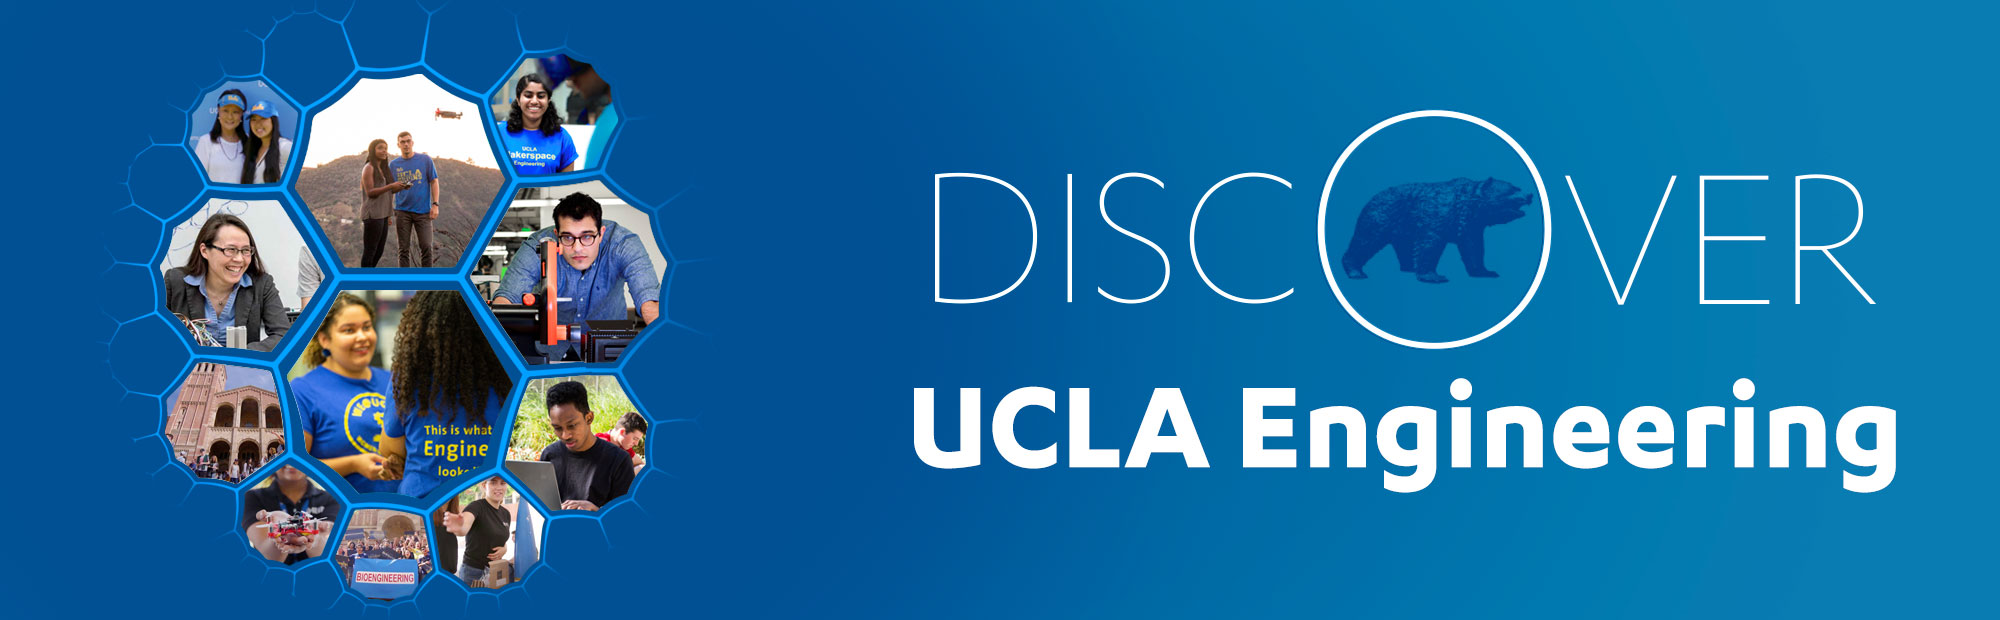 DIscover UCLA Engineering - 2021